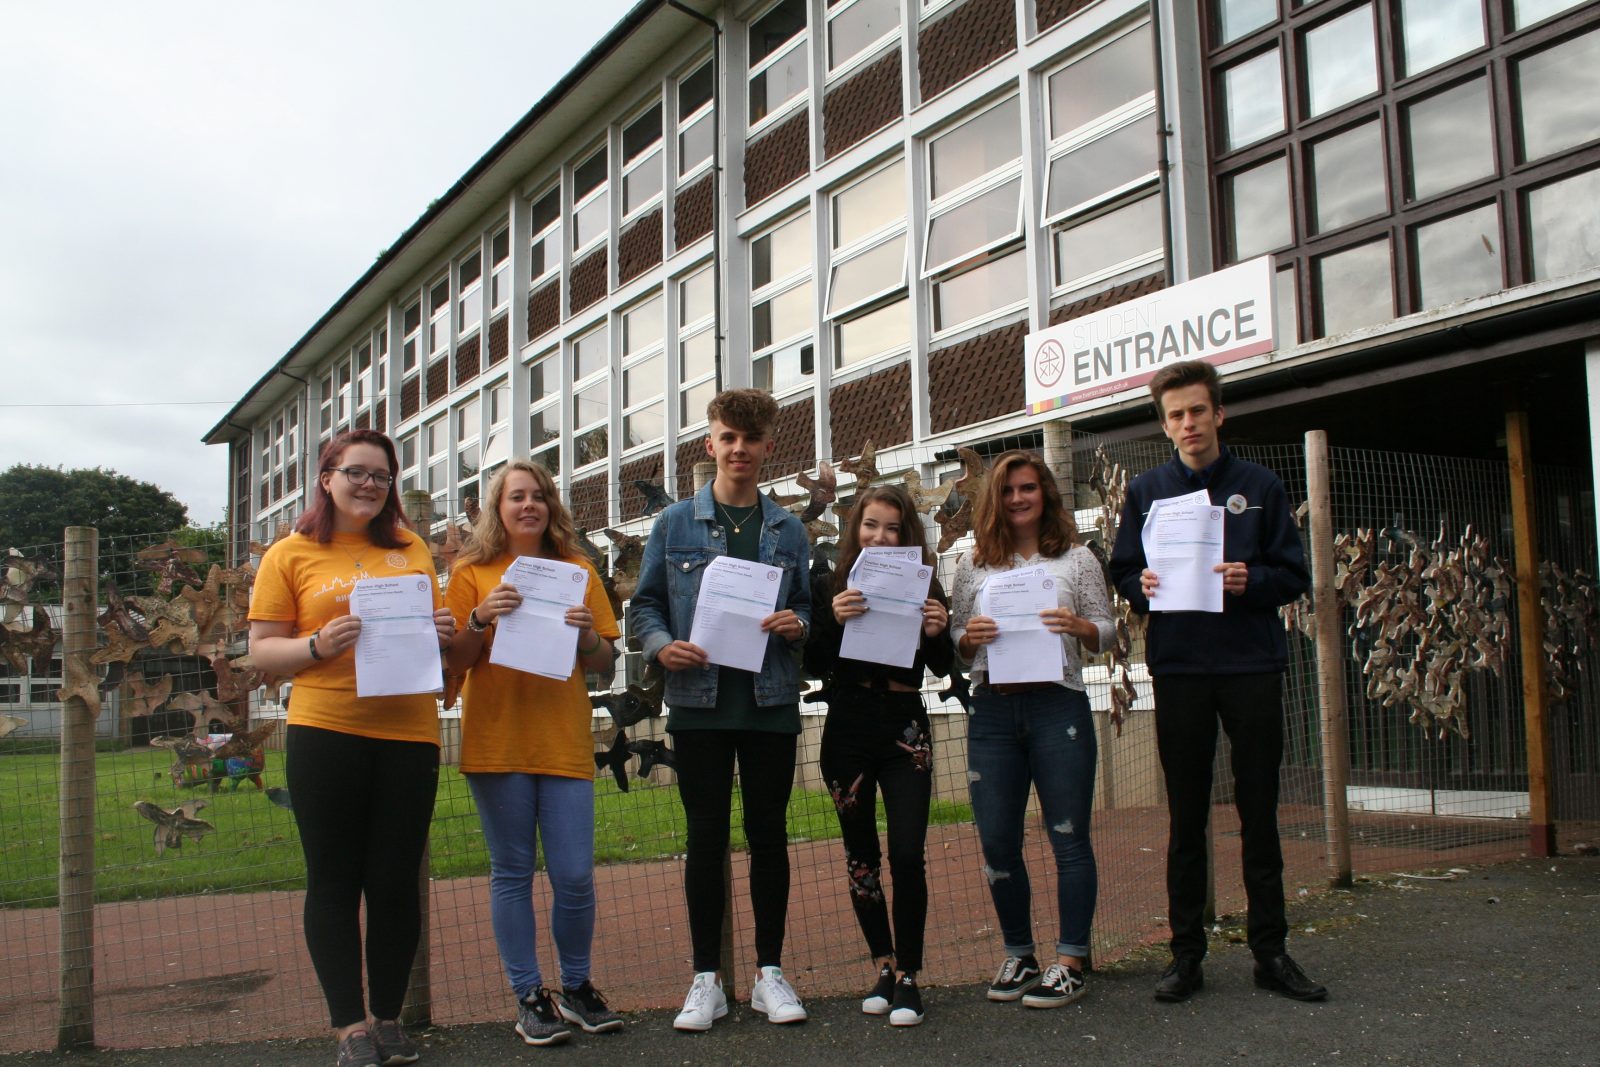 Best ever GCSE results for Tiverton High School - Tiverton High School